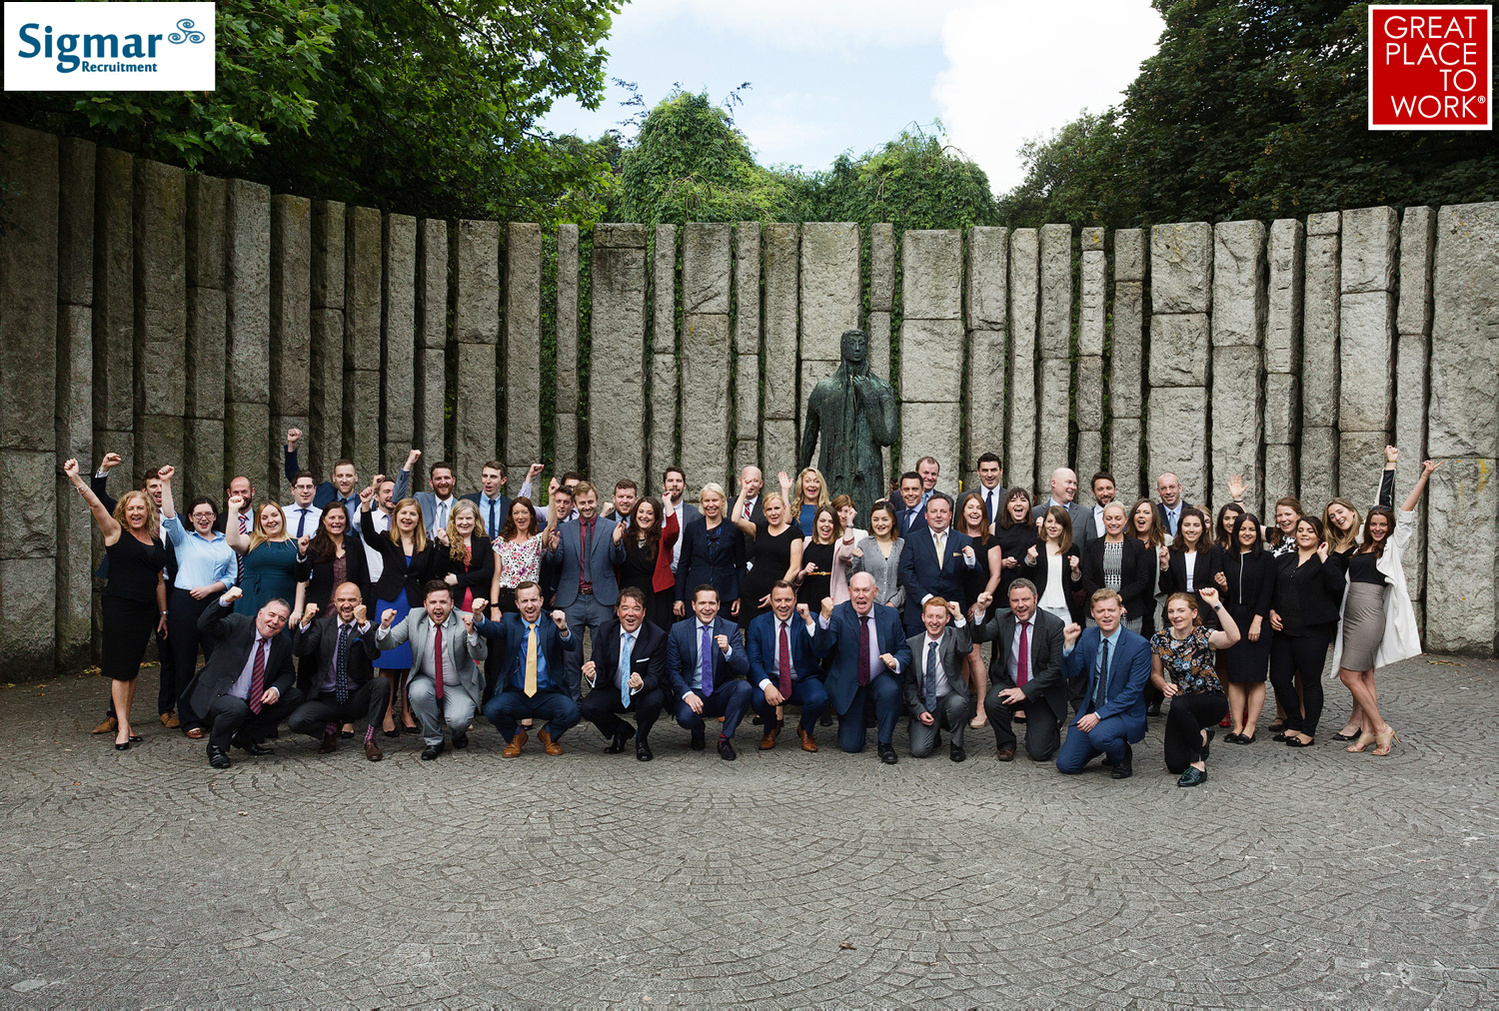 Large corporate company group photo outdoors winning great place to work award